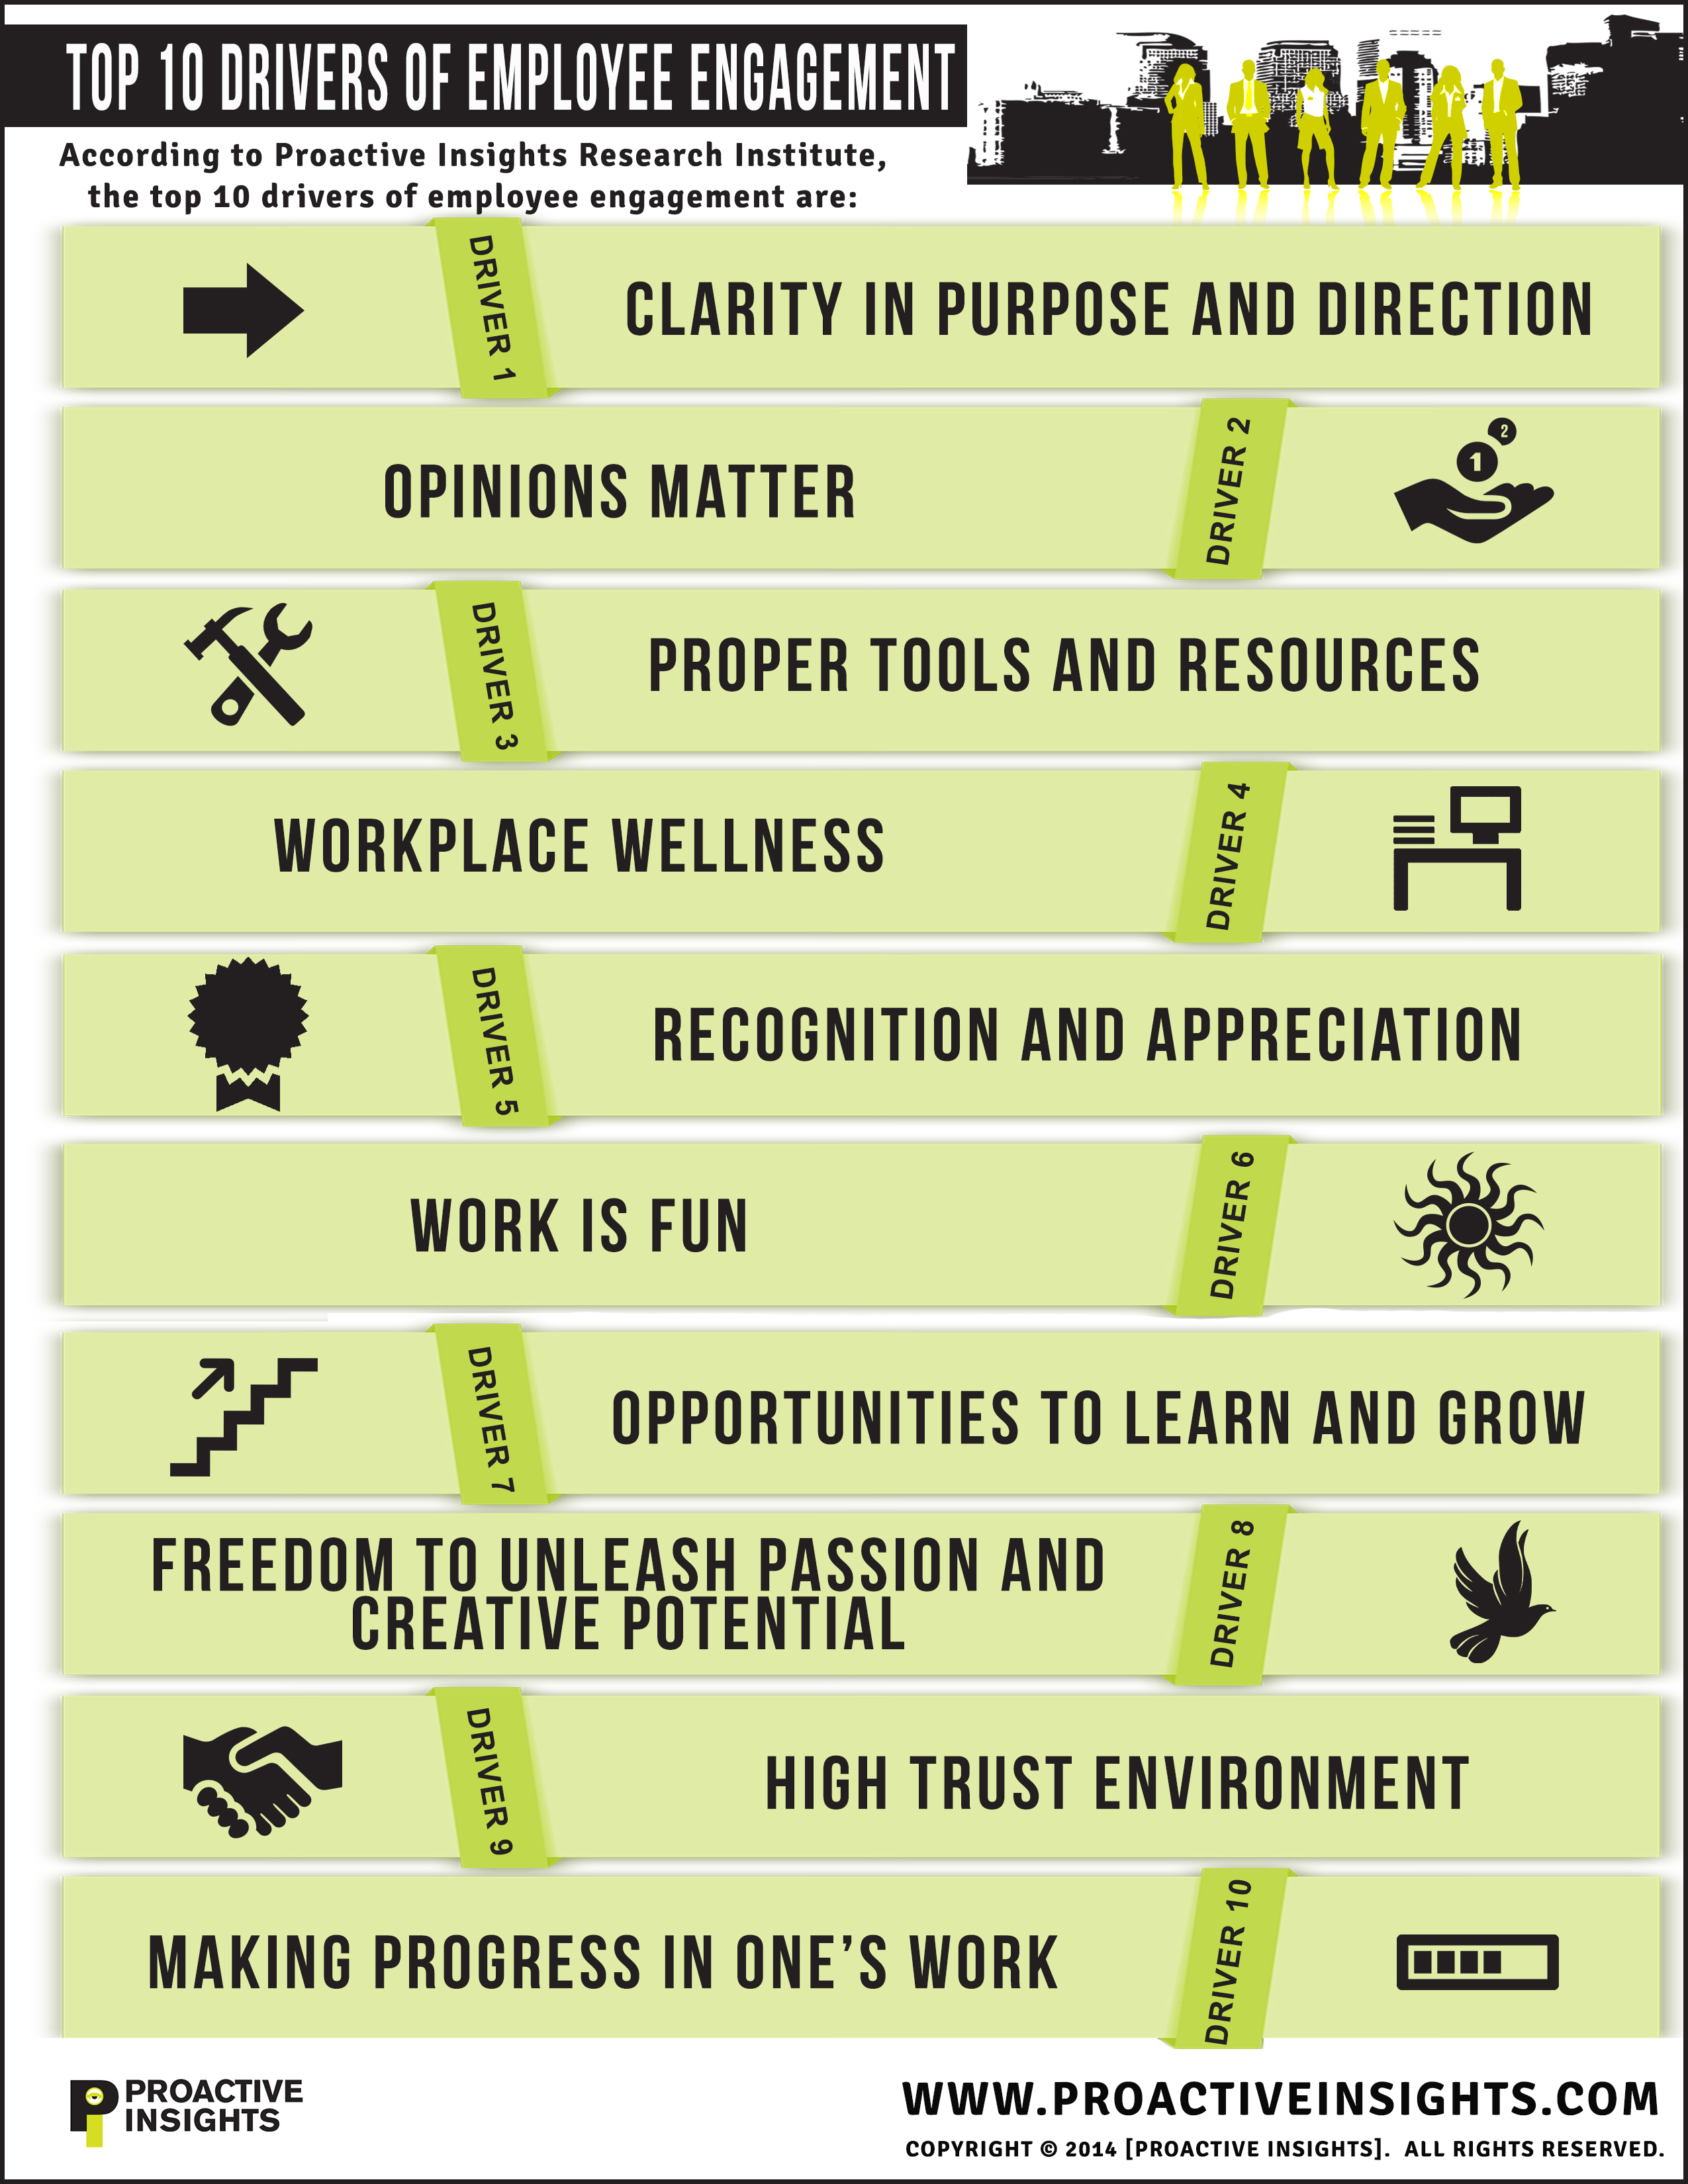 Top 10 Drivers of Employee Engagement